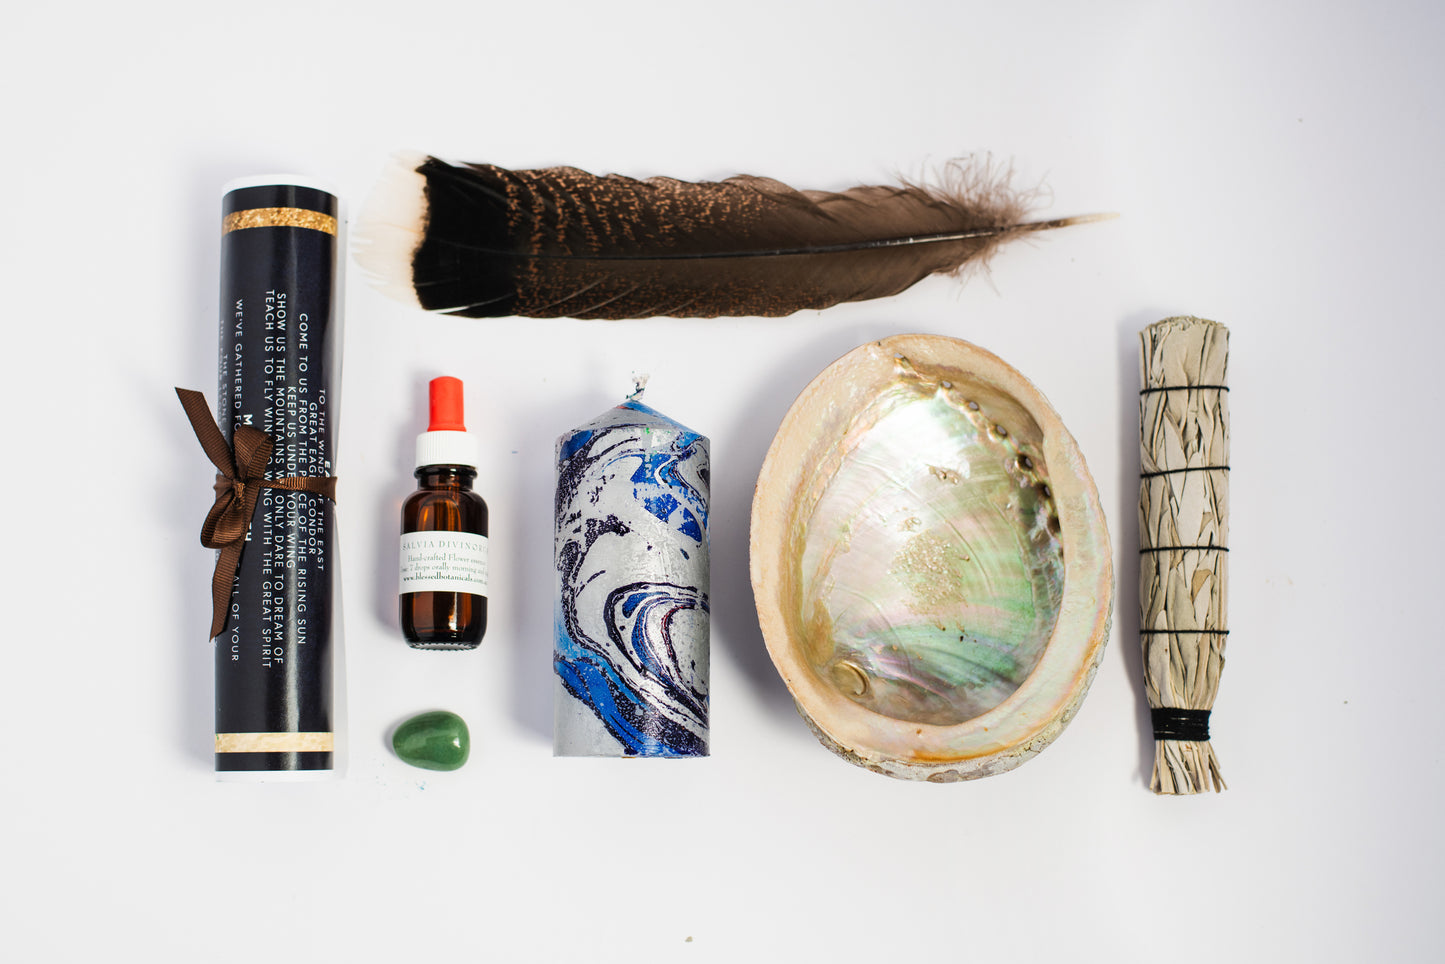 fiona gray herbalist, blessed botanicals apothecary, ritual bundles ceremony sacred, wicca wiccan, pagan, green witch, smudging feather smudge stick invocation setting intentions letting go cleansing purifying nimbin candle factory crystal, new beginnings, green aventurine, abalone shell